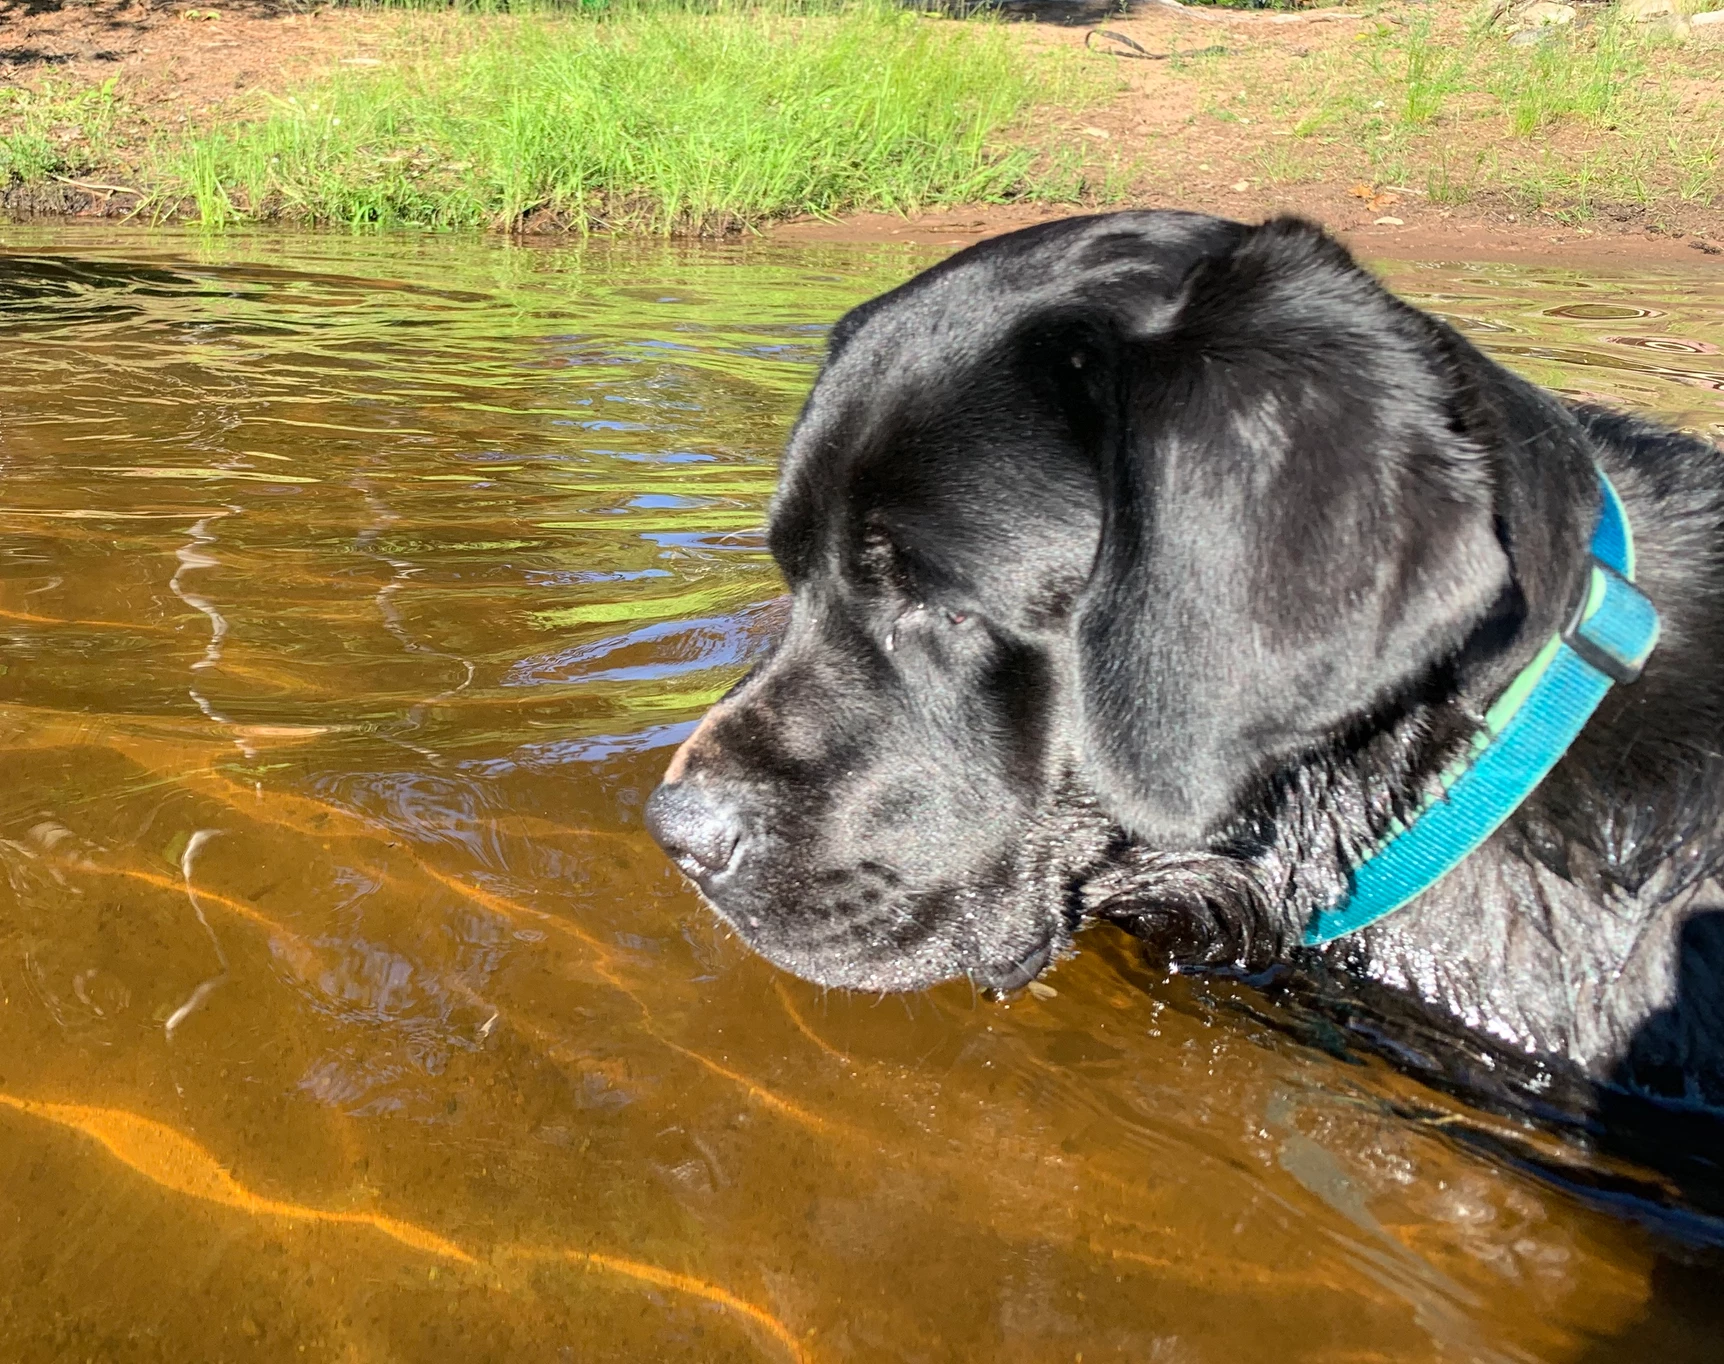 Ace tries swimming & fishing